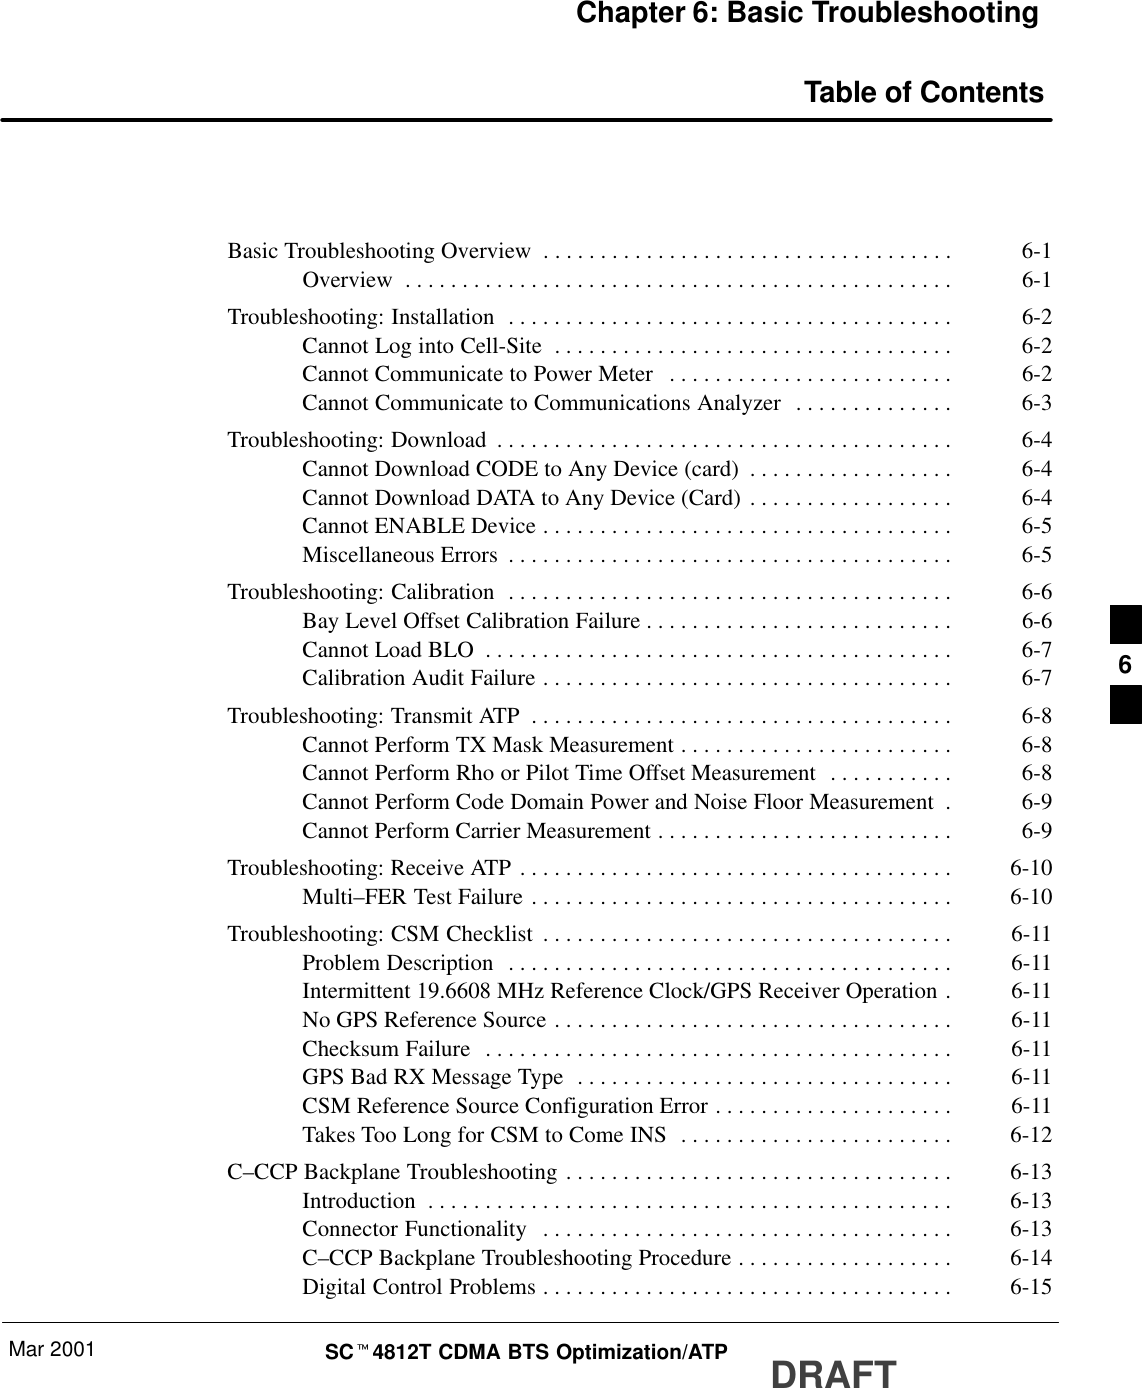 Mar 2001 SCt4812T CDMA BTS Optimization/ATP DRAFTChapter 6: Basic TroubleshootingTable of ContentsBasic Troubleshooting Overview 6-1. . . . . . . . . . . . . . . . . . . . . . . . . . . . . . . . . . . . Overview 6-1. . . . . . . . . . . . . . . . . . . . . . . . . . . . . . . . . . . . . . . . . . . . . . . . Troubleshooting: Installation 6-2. . . . . . . . . . . . . . . . . . . . . . . . . . . . . . . . . . . . . . . Cannot Log into Cell-Site 6-2. . . . . . . . . . . . . . . . . . . . . . . . . . . . . . . . . . . Cannot Communicate to Power Meter 6-2. . . . . . . . . . . . . . . . . . . . . . . . . Cannot Communicate to Communications Analyzer 6-3. . . . . . . . . . . . . . Troubleshooting: Download 6-4. . . . . . . . . . . . . . . . . . . . . . . . . . . . . . . . . . . . . . . . Cannot Download CODE to Any Device (card) 6-4. . . . . . . . . . . . . . . . . . Cannot Download DATA to Any Device (Card) 6-4. . . . . . . . . . . . . . . . . . Cannot ENABLE Device 6-5. . . . . . . . . . . . . . . . . . . . . . . . . . . . . . . . . . . . Miscellaneous Errors 6-5. . . . . . . . . . . . . . . . . . . . . . . . . . . . . . . . . . . . . . . Troubleshooting: Calibration 6-6. . . . . . . . . . . . . . . . . . . . . . . . . . . . . . . . . . . . . . . Bay Level Offset Calibration Failure 6-6. . . . . . . . . . . . . . . . . . . . . . . . . . . Cannot Load BLO 6-7. . . . . . . . . . . . . . . . . . . . . . . . . . . . . . . . . . . . . . . . . Calibration Audit Failure 6-7. . . . . . . . . . . . . . . . . . . . . . . . . . . . . . . . . . . . Troubleshooting: Transmit ATP 6-8. . . . . . . . . . . . . . . . . . . . . . . . . . . . . . . . . . . . . Cannot Perform TX Mask Measurement 6-8. . . . . . . . . . . . . . . . . . . . . . . . Cannot Perform Rho or Pilot Time Offset Measurement 6-8. . . . . . . . . . . Cannot Perform Code Domain Power and Noise Floor Measurement 6-9. Cannot Perform Carrier Measurement 6-9. . . . . . . . . . . . . . . . . . . . . . . . . . Troubleshooting: Receive ATP 6-10. . . . . . . . . . . . . . . . . . . . . . . . . . . . . . . . . . . . . . Multi–FER Test Failure 6-10. . . . . . . . . . . . . . . . . . . . . . . . . . . . . . . . . . . . . Troubleshooting: CSM Checklist 6-11. . . . . . . . . . . . . . . . . . . . . . . . . . . . . . . . . . . . Problem Description 6-11. . . . . . . . . . . . . . . . . . . . . . . . . . . . . . . . . . . . . . . Intermittent 19.6608 MHz Reference Clock/GPS Receiver Operation 6-11. No GPS Reference Source 6-11. . . . . . . . . . . . . . . . . . . . . . . . . . . . . . . . . . . Checksum Failure 6-11. . . . . . . . . . . . . . . . . . . . . . . . . . . . . . . . . . . . . . . . . GPS Bad RX Message Type 6-11. . . . . . . . . . . . . . . . . . . . . . . . . . . . . . . . . CSM Reference Source Configuration Error 6-11. . . . . . . . . . . . . . . . . . . . . Takes Too Long for CSM to Come INS 6-12. . . . . . . . . . . . . . . . . . . . . . . . C–CCP Backplane Troubleshooting 6-13. . . . . . . . . . . . . . . . . . . . . . . . . . . . . . . . . . Introduction 6-13. . . . . . . . . . . . . . . . . . . . . . . . . . . . . . . . . . . . . . . . . . . . . . Connector Functionality 6-13. . . . . . . . . . . . . . . . . . . . . . . . . . . . . . . . . . . . C–CCP Backplane Troubleshooting Procedure 6-14. . . . . . . . . . . . . . . . . . . Digital Control Problems 6-15. . . . . . . . . . . . . . . . . . . . . . . . . . . . . . . . . . . . 6